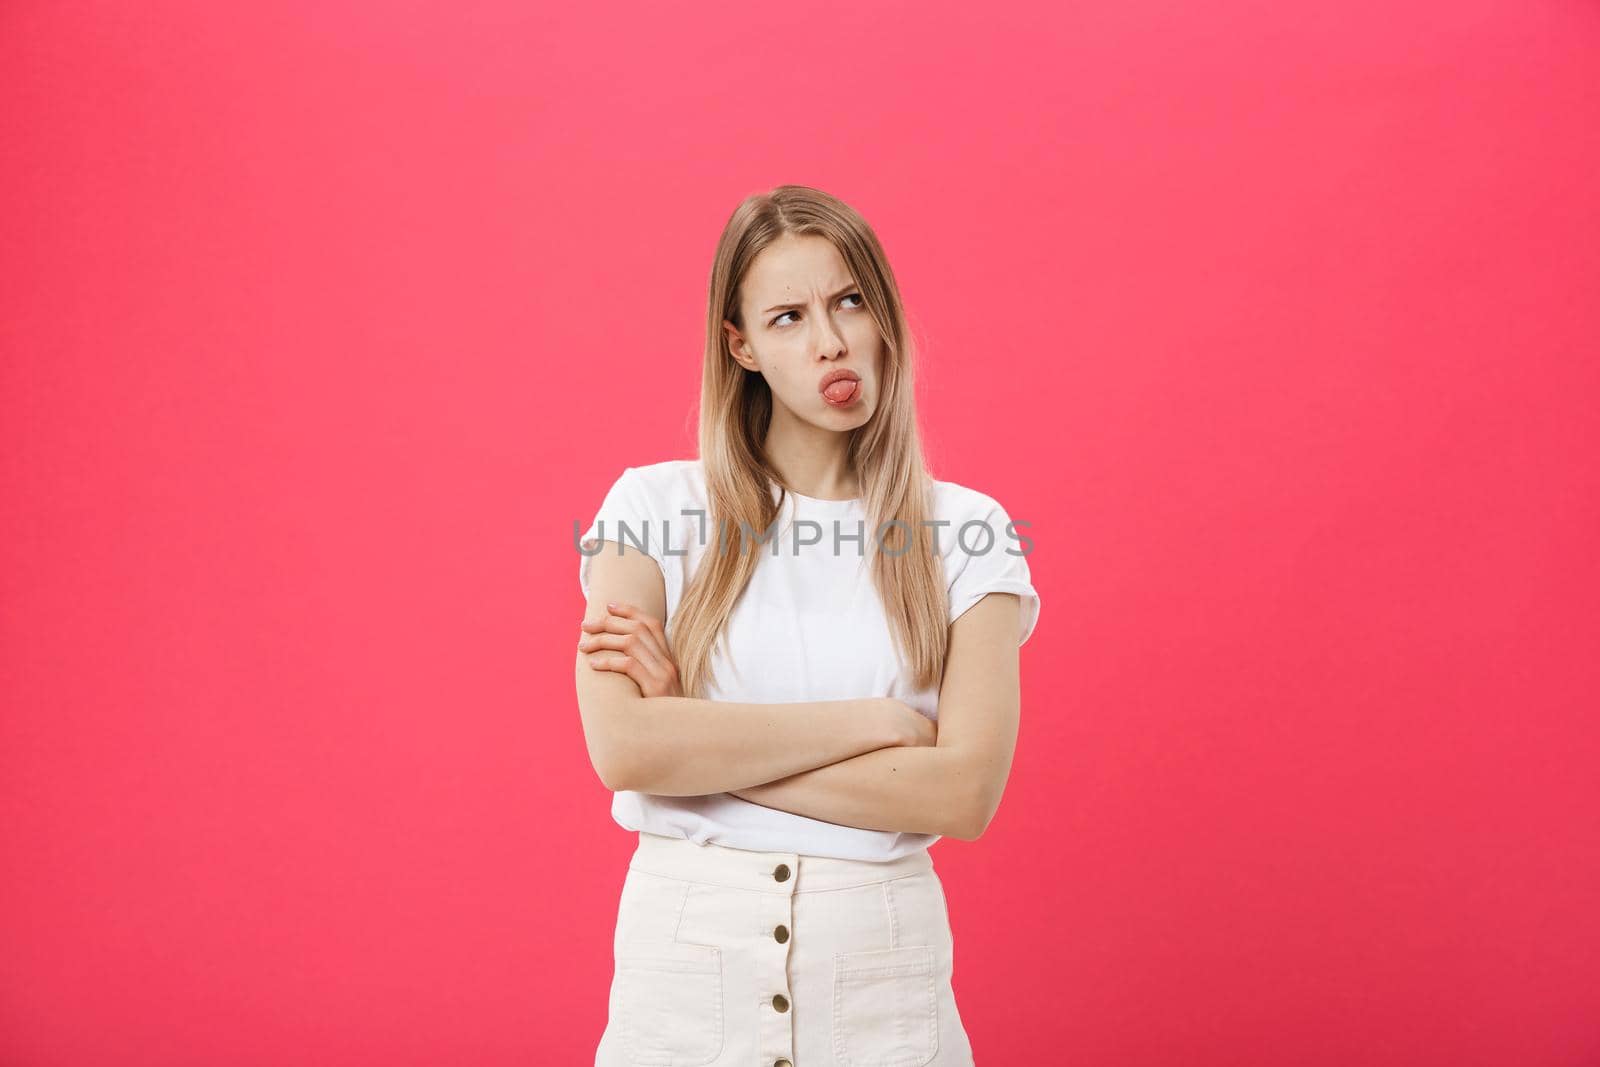 Bored woman. Boring, dull, tedious concept. Young pretty caucasian emotional woman. Human emotions, facial expression concept. Studio Isolated on trendy pink background.